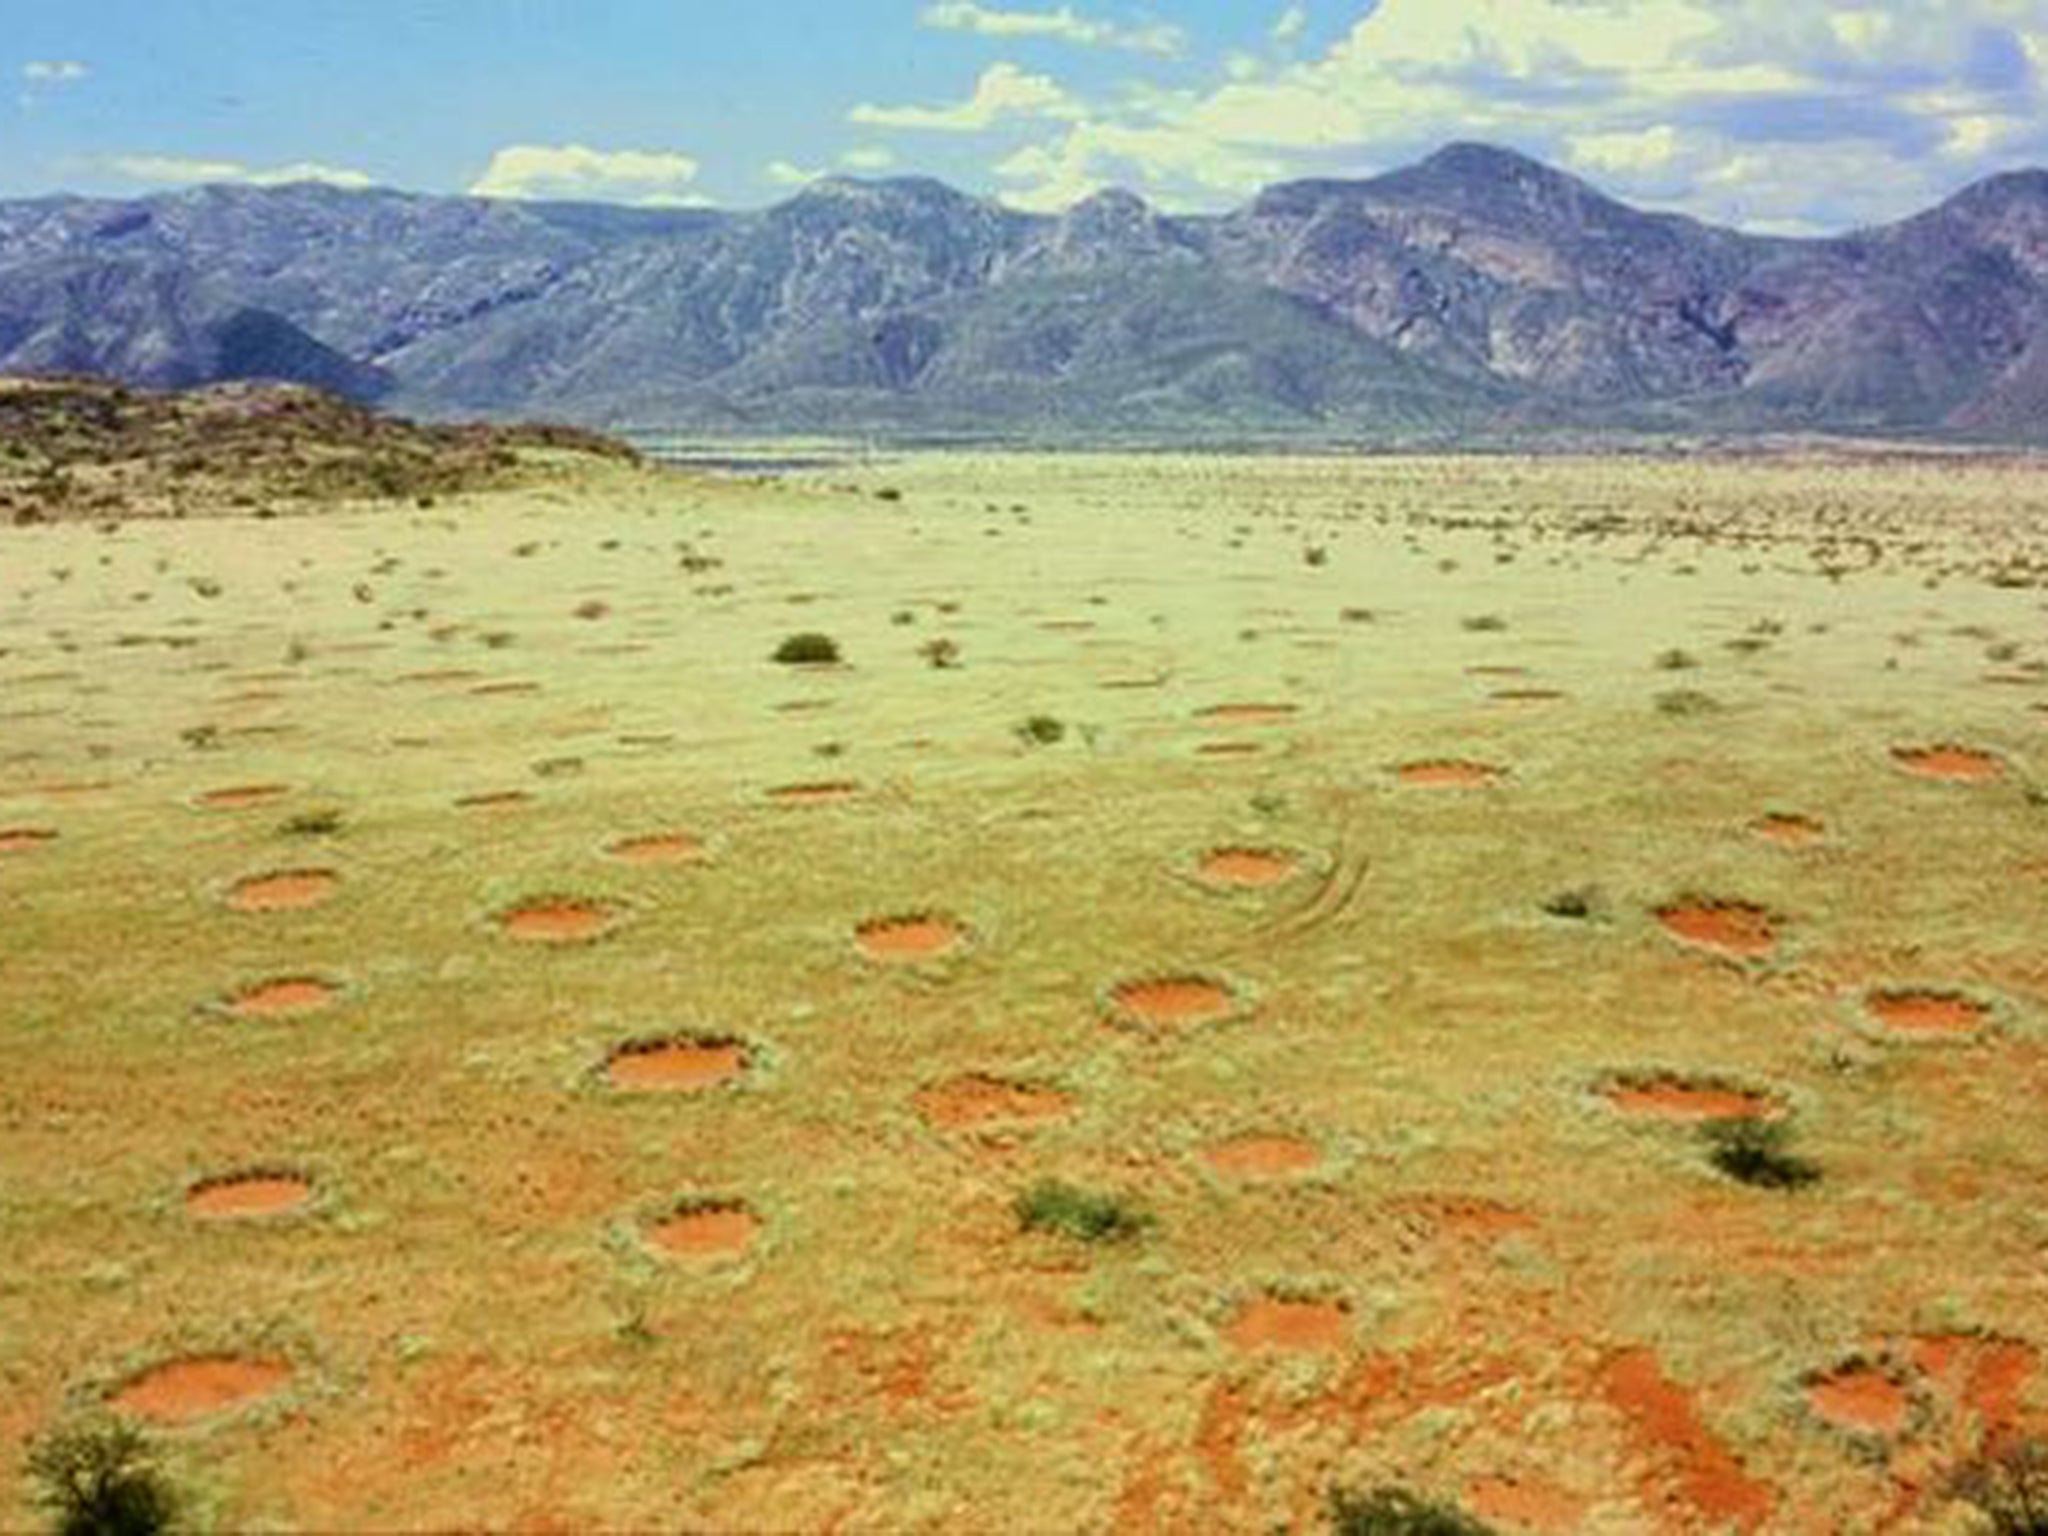 First Peoples' knowledge of 'mysterious fairy circles' in Australian  deserts has upended a long-standing science debate